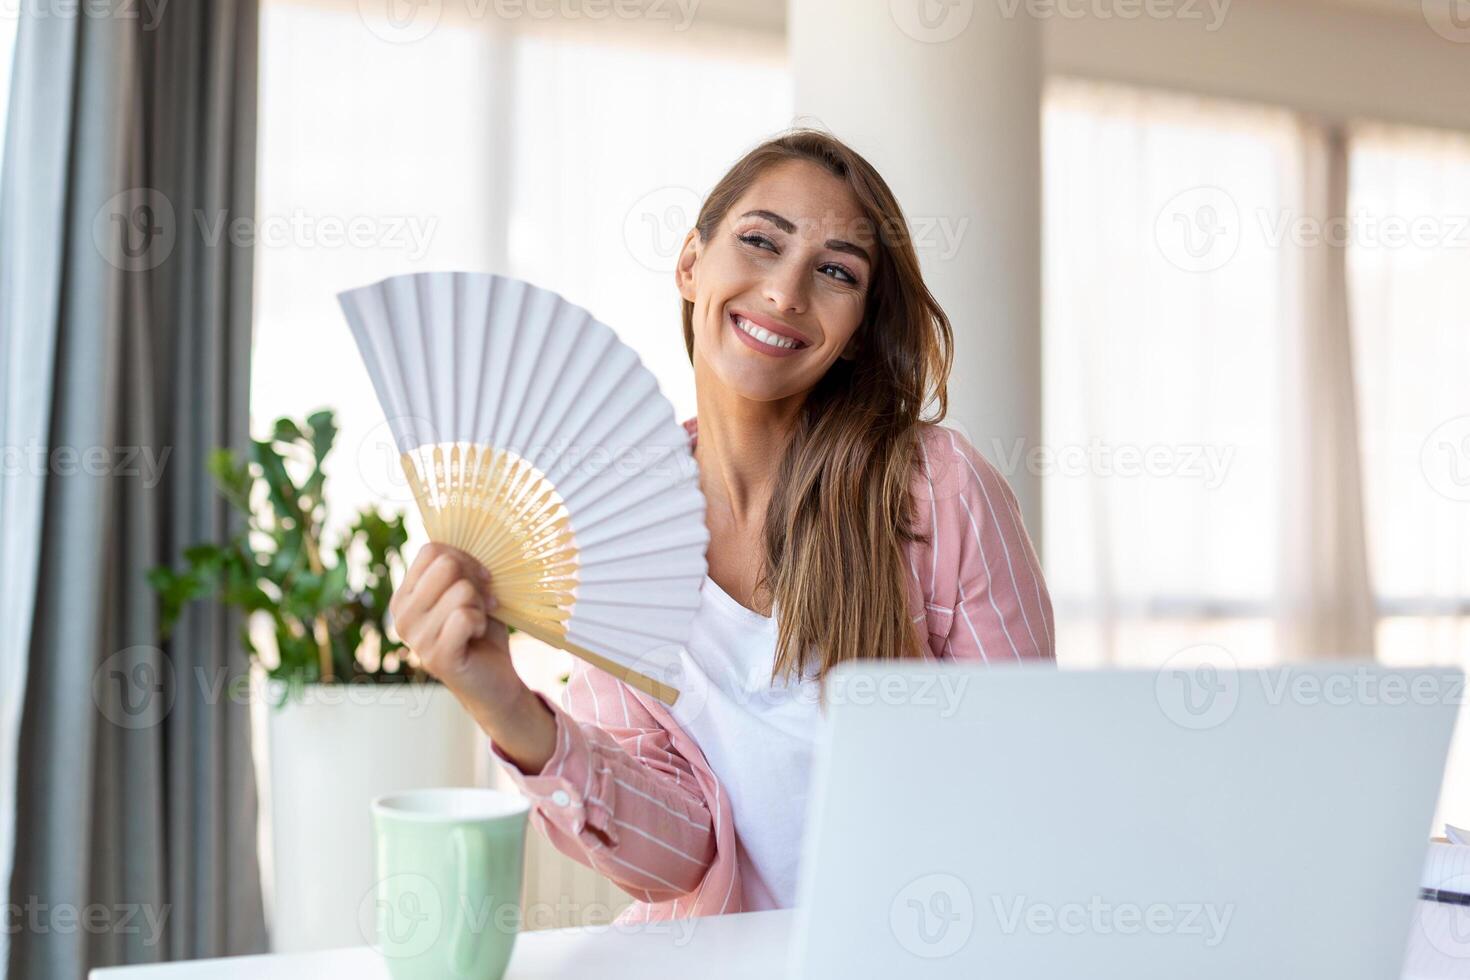 Tired overheated young woman hold wave fan suffer from heat sweating indoor work on laptop at home office, annoyed woman feel uncomfortable hot summer weather problem no air conditioner concept photo